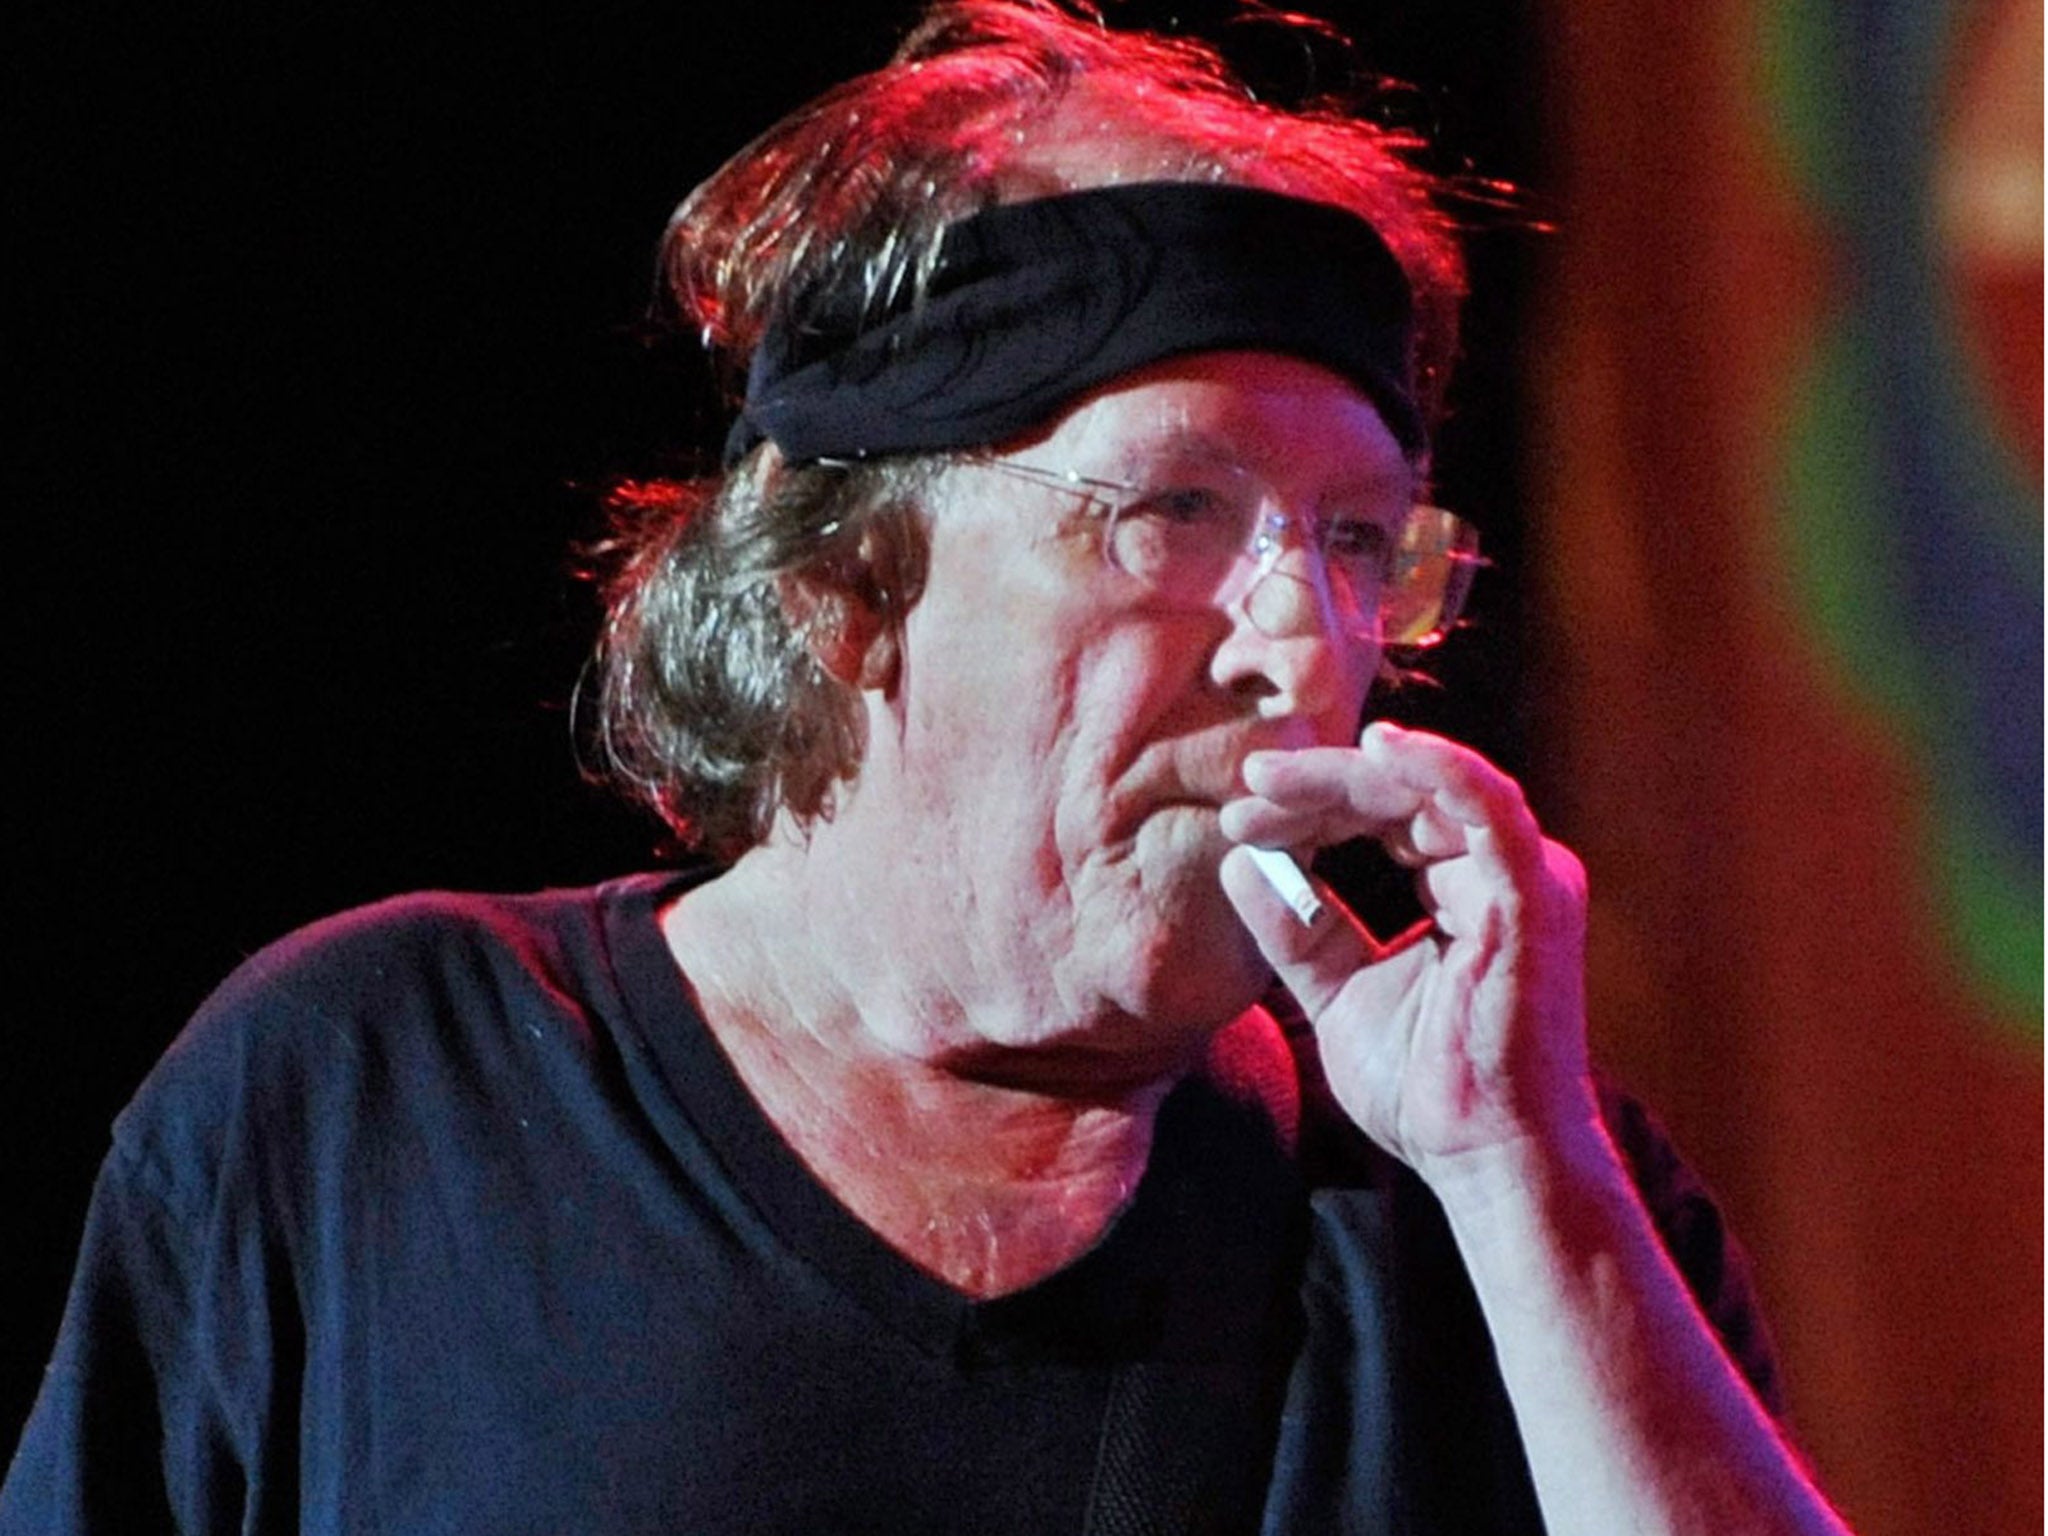 Paul Kantner performing on stage with the US rock band Jefferson Starship as he smokes a cigarette between songs, at the Bethel Woods Music Festival,